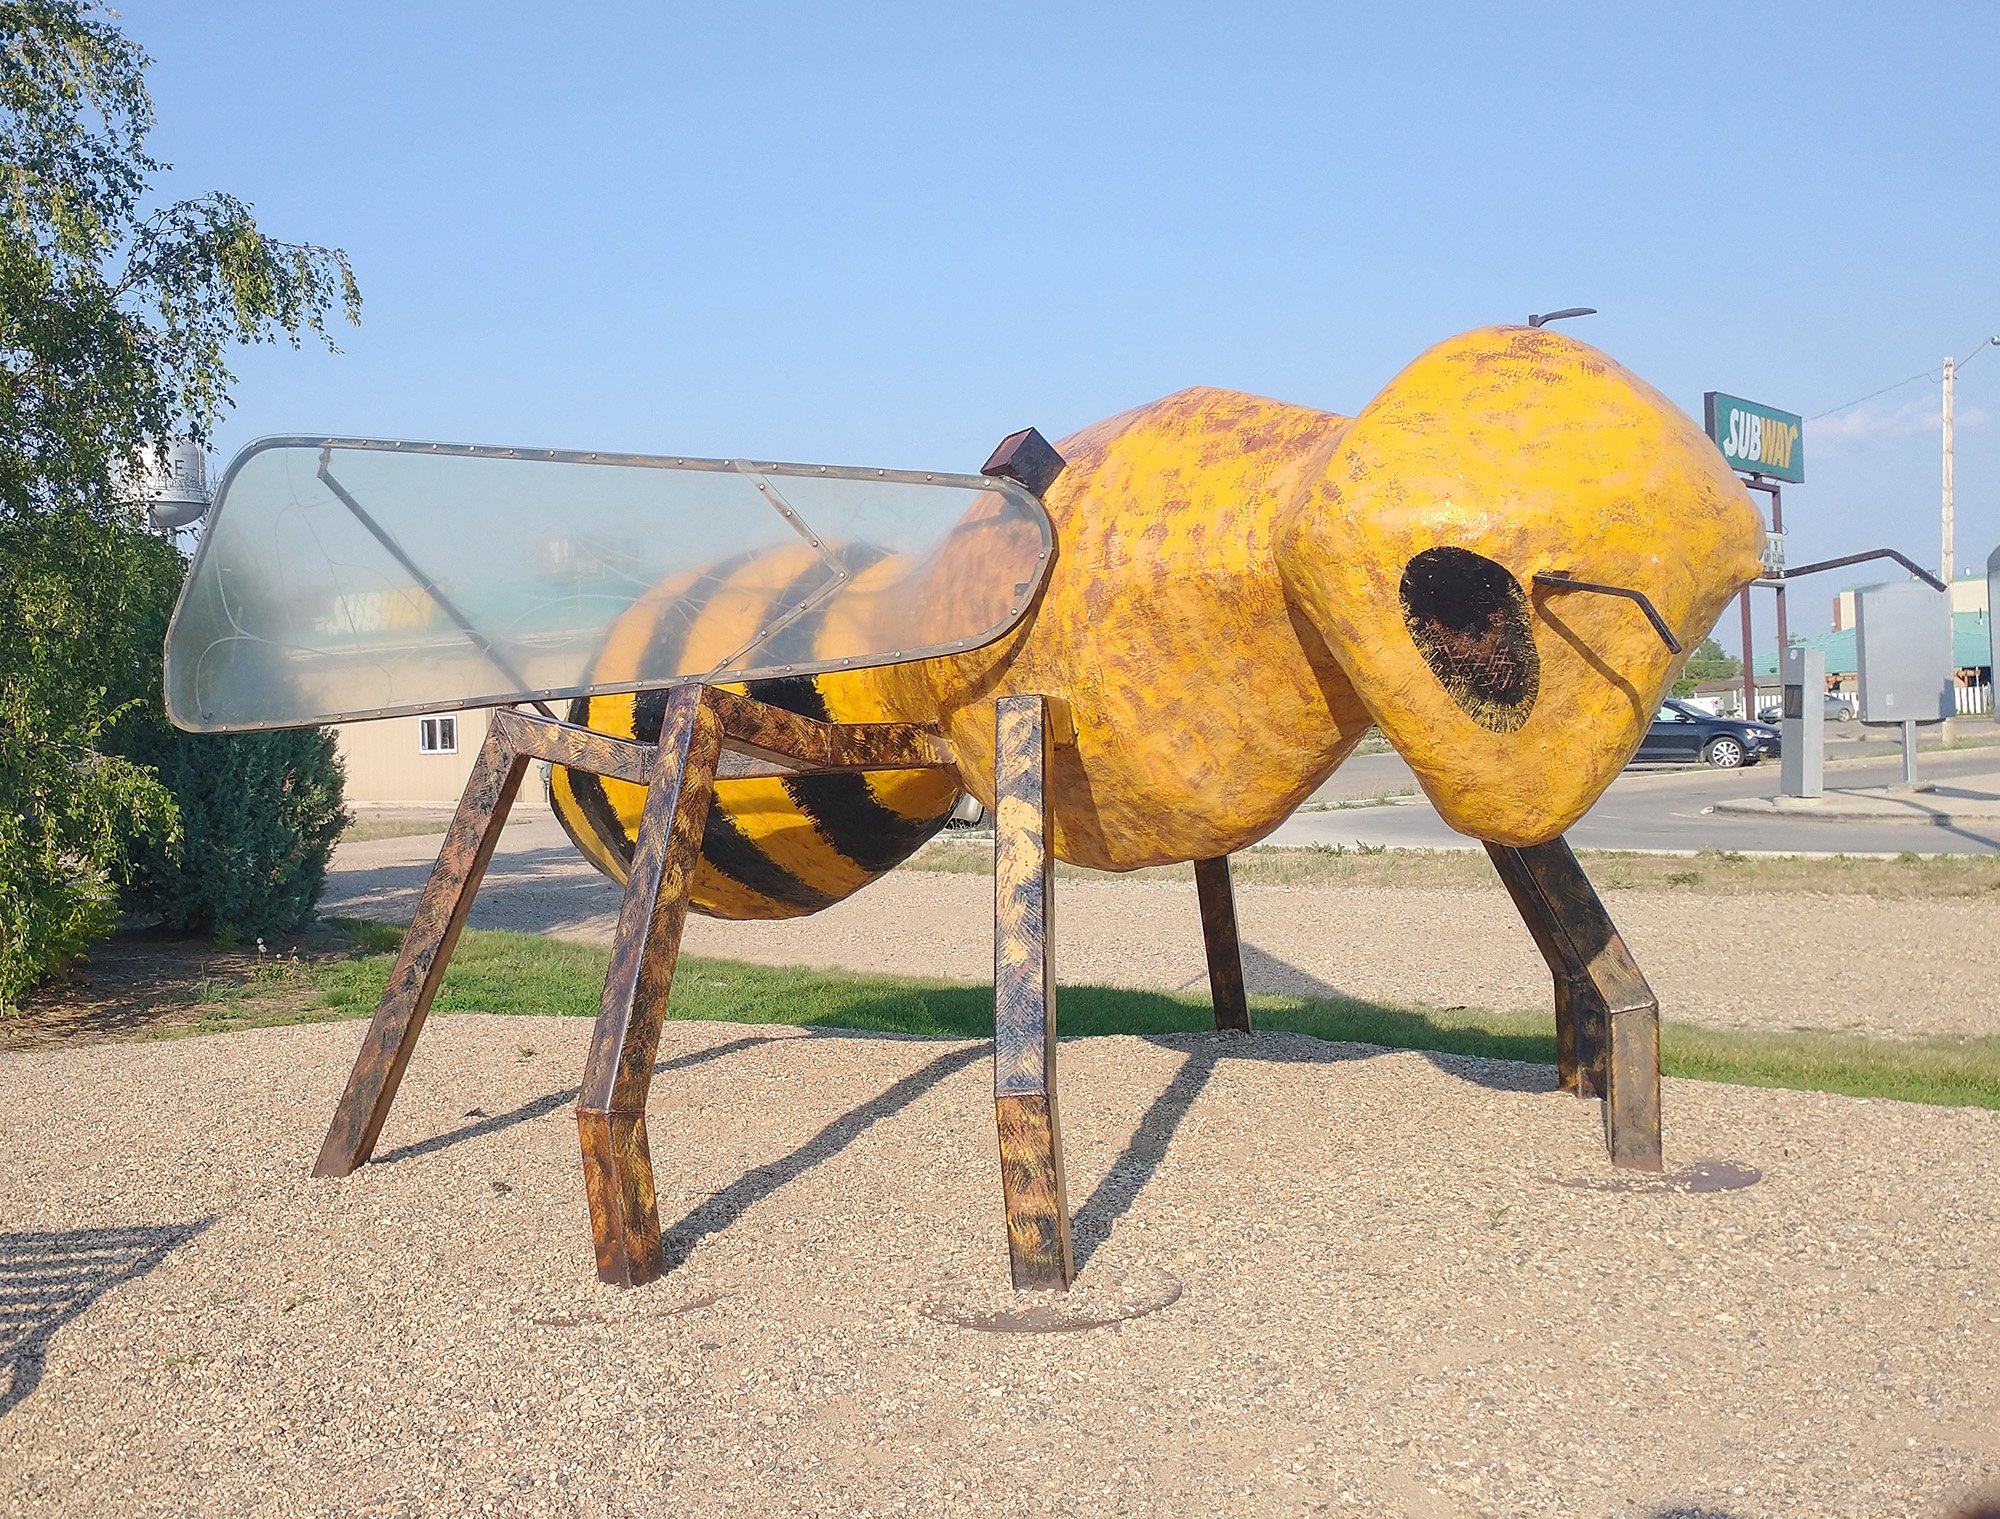 So this is the largest HONEY bee, because there's a largest BEE in Alberta.